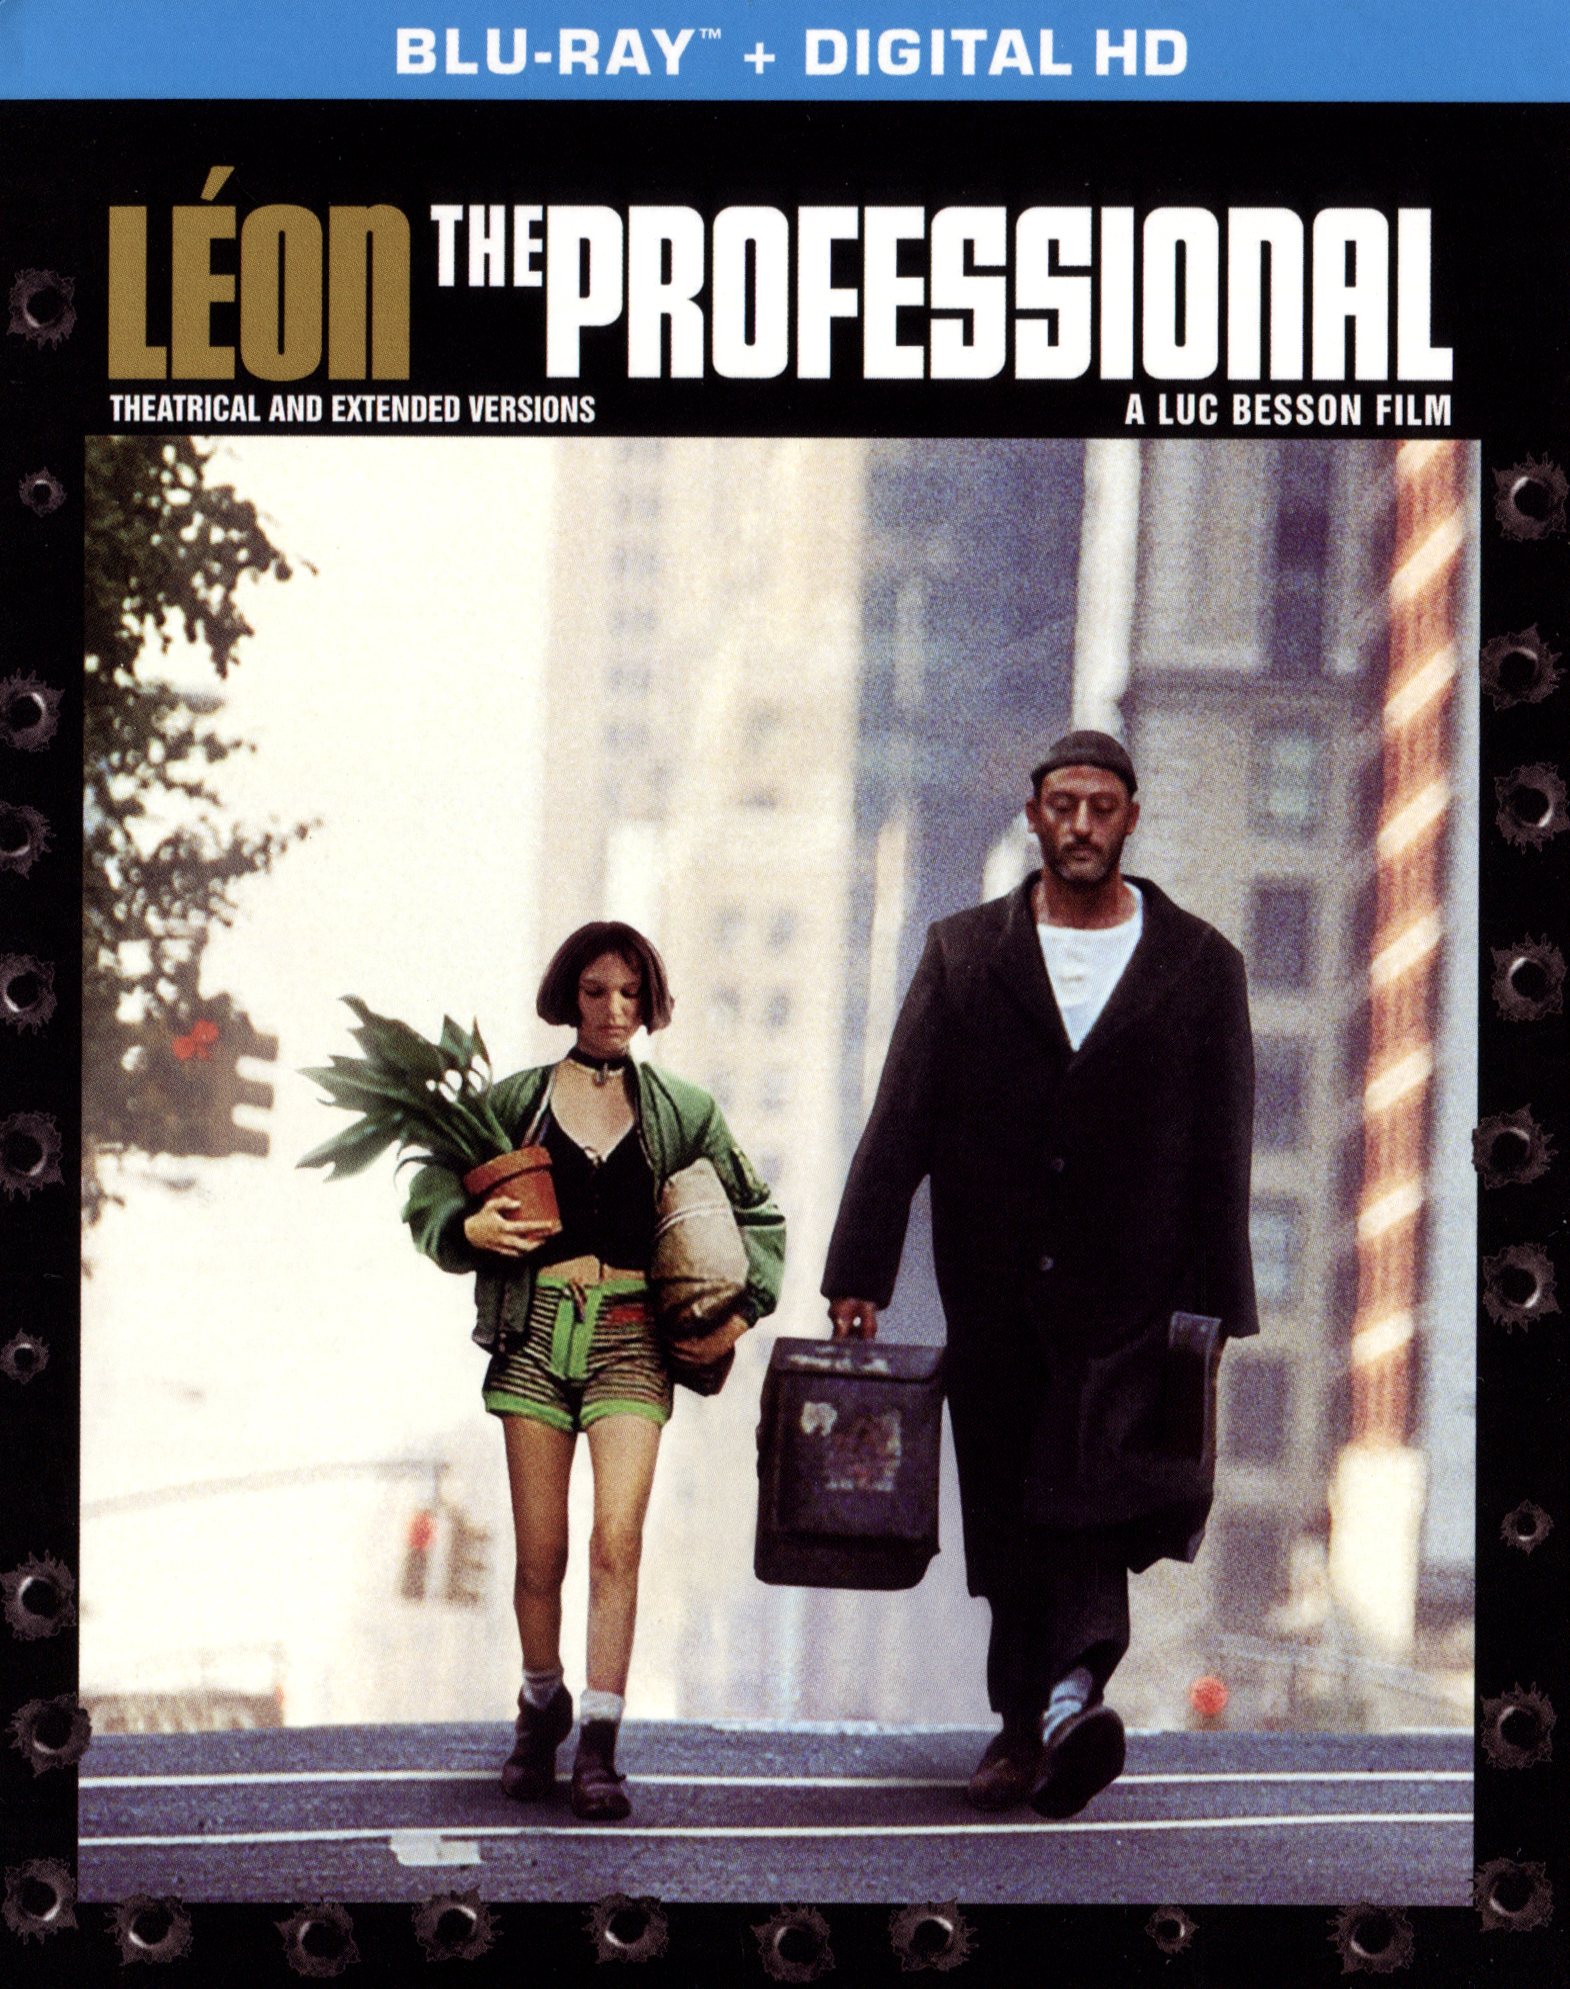 the professional